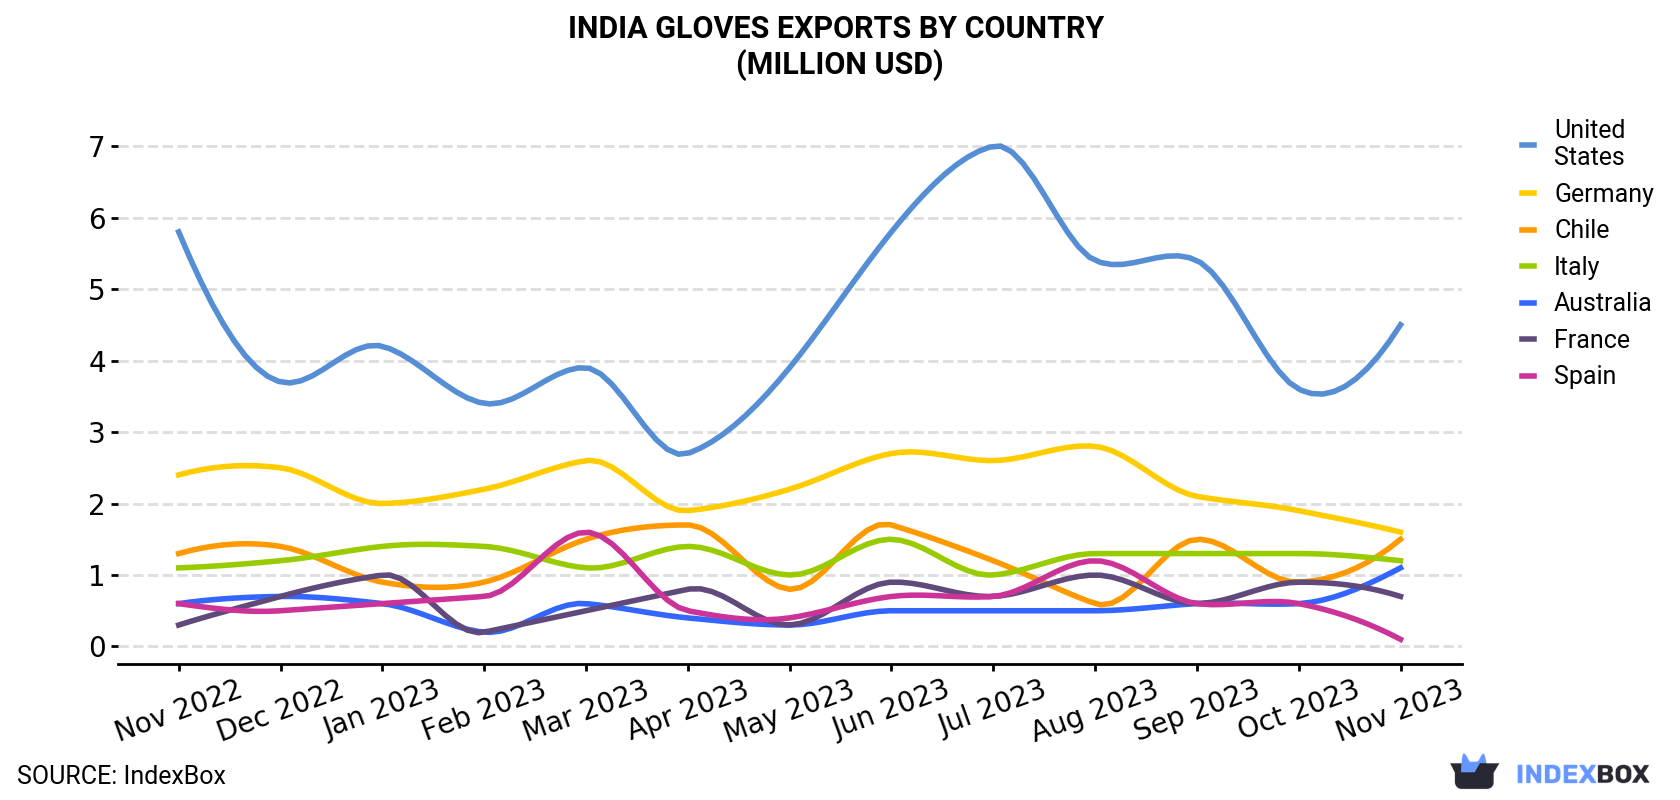 India Gloves Exports By Country (Million USD)